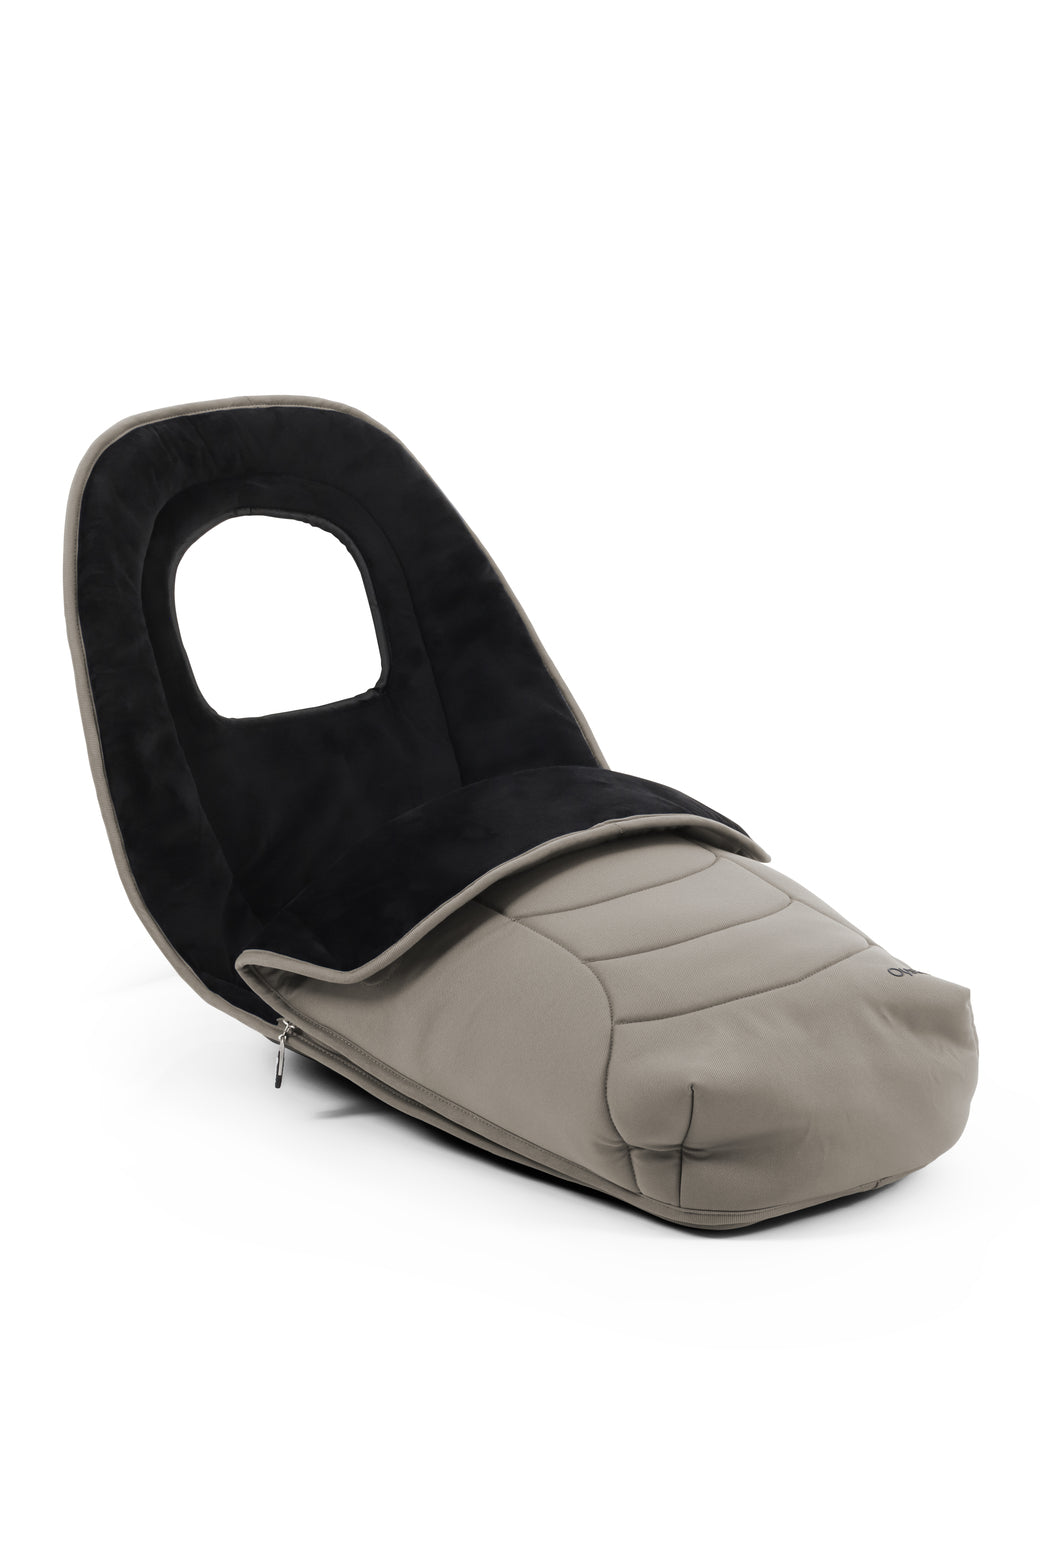 BabyStyle Oyster 3 Footmuff - Stone -  | For Your Little One